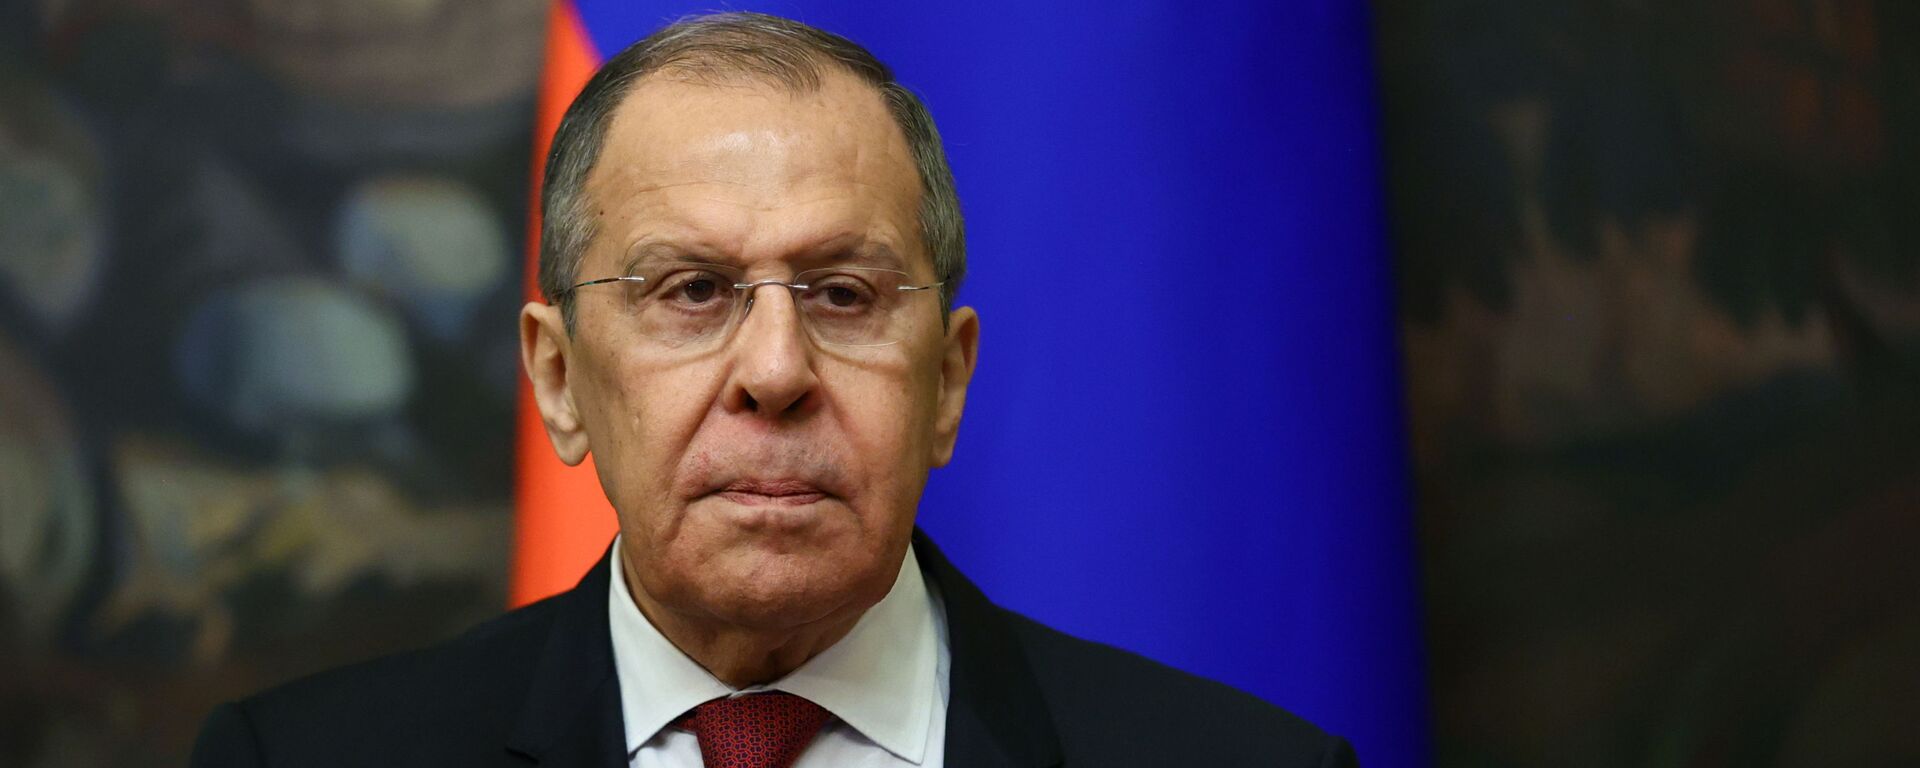 Russia's Foreign Minister Sergei Lavrov attends a meeting with his counterpart from Turkmenistan Rashid Meredov in Moscow, Russia April 1, 2021. - Sputnik International, 1920, 28.04.2021